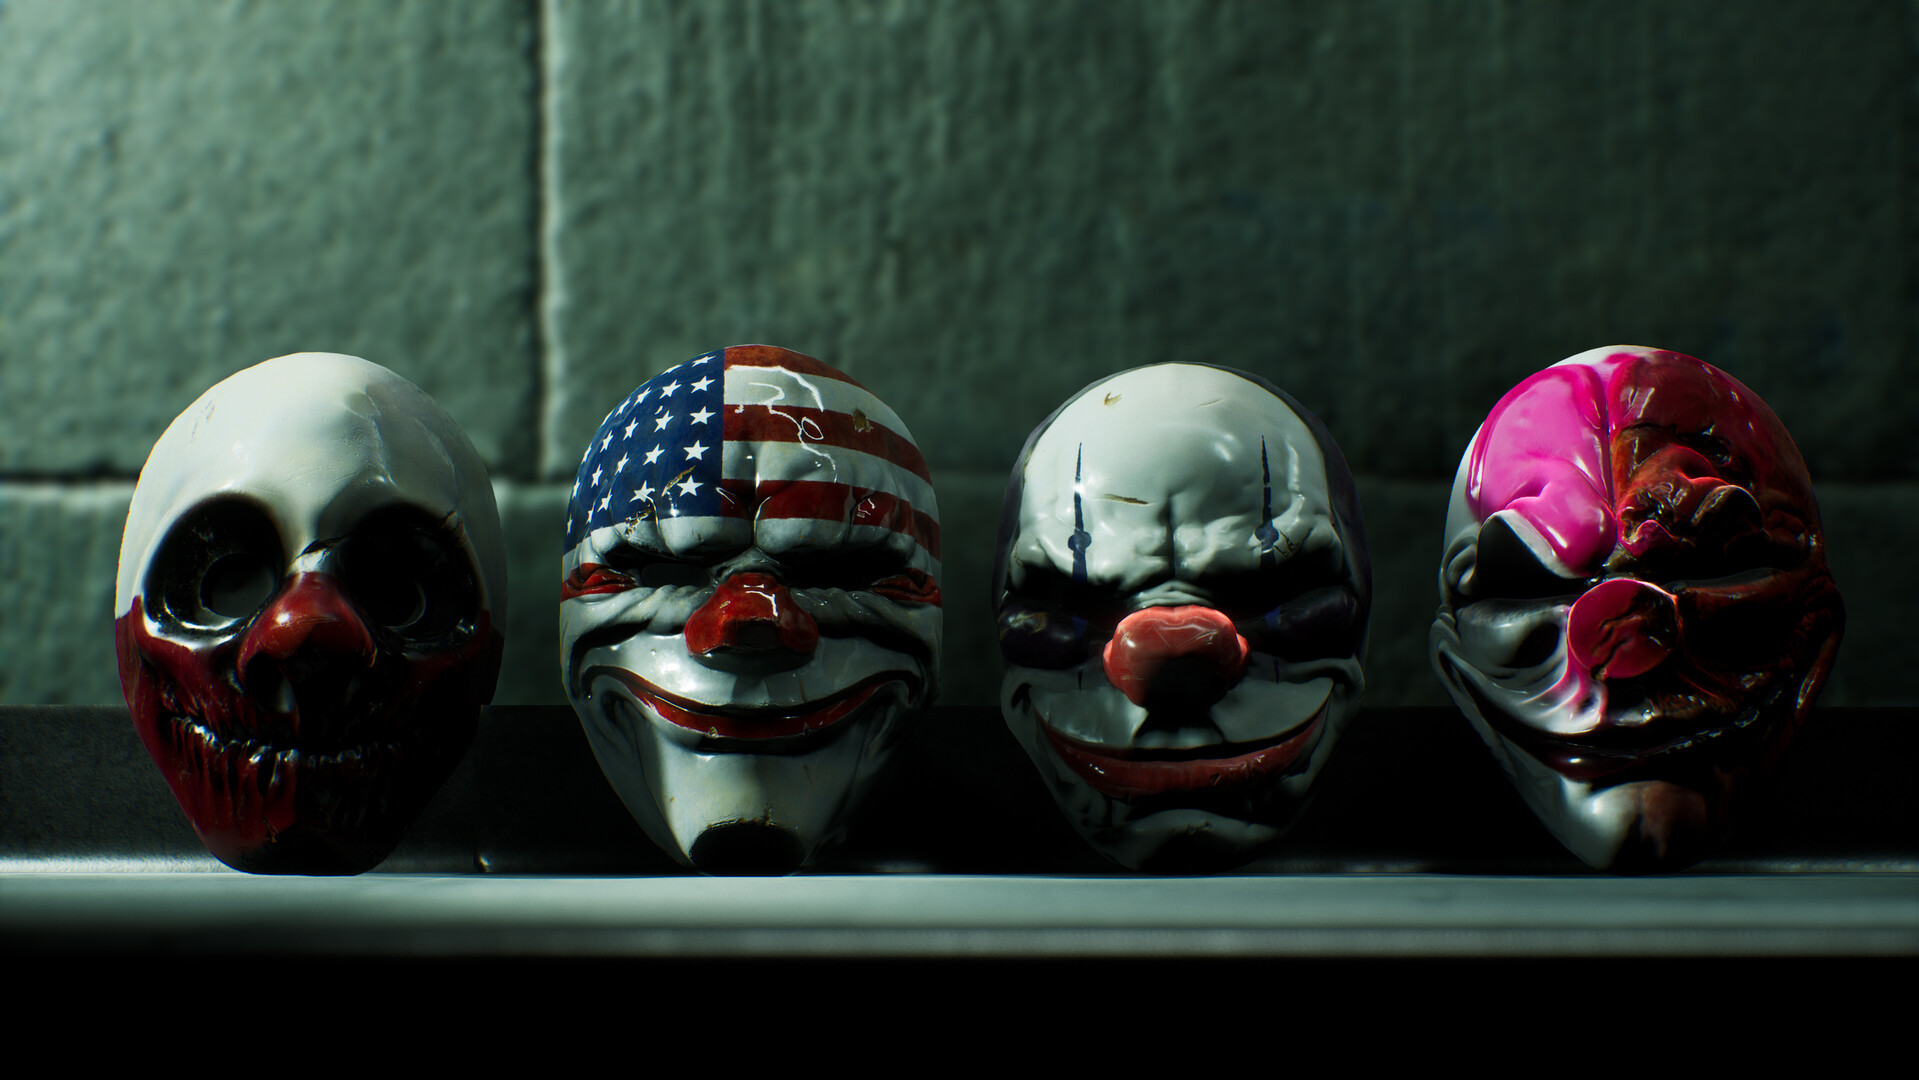 PAYDAY 3 Epic Games CD Key